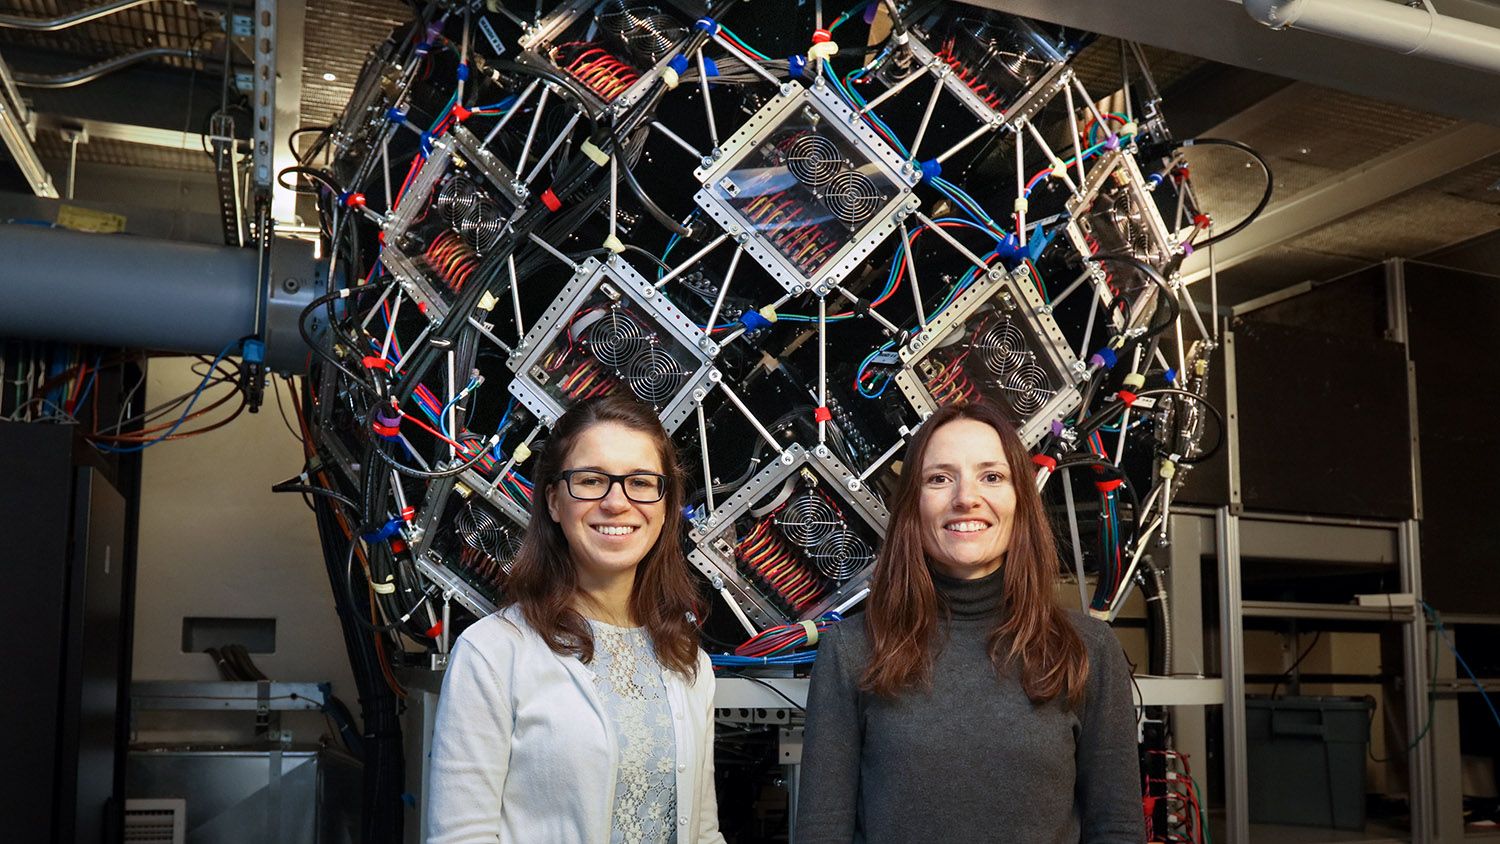 CALS Ph.D. student Gabriela Schroder and CALS professor of biochemistry FLora Meilleur stand in front of a complicated machine at ORNL.